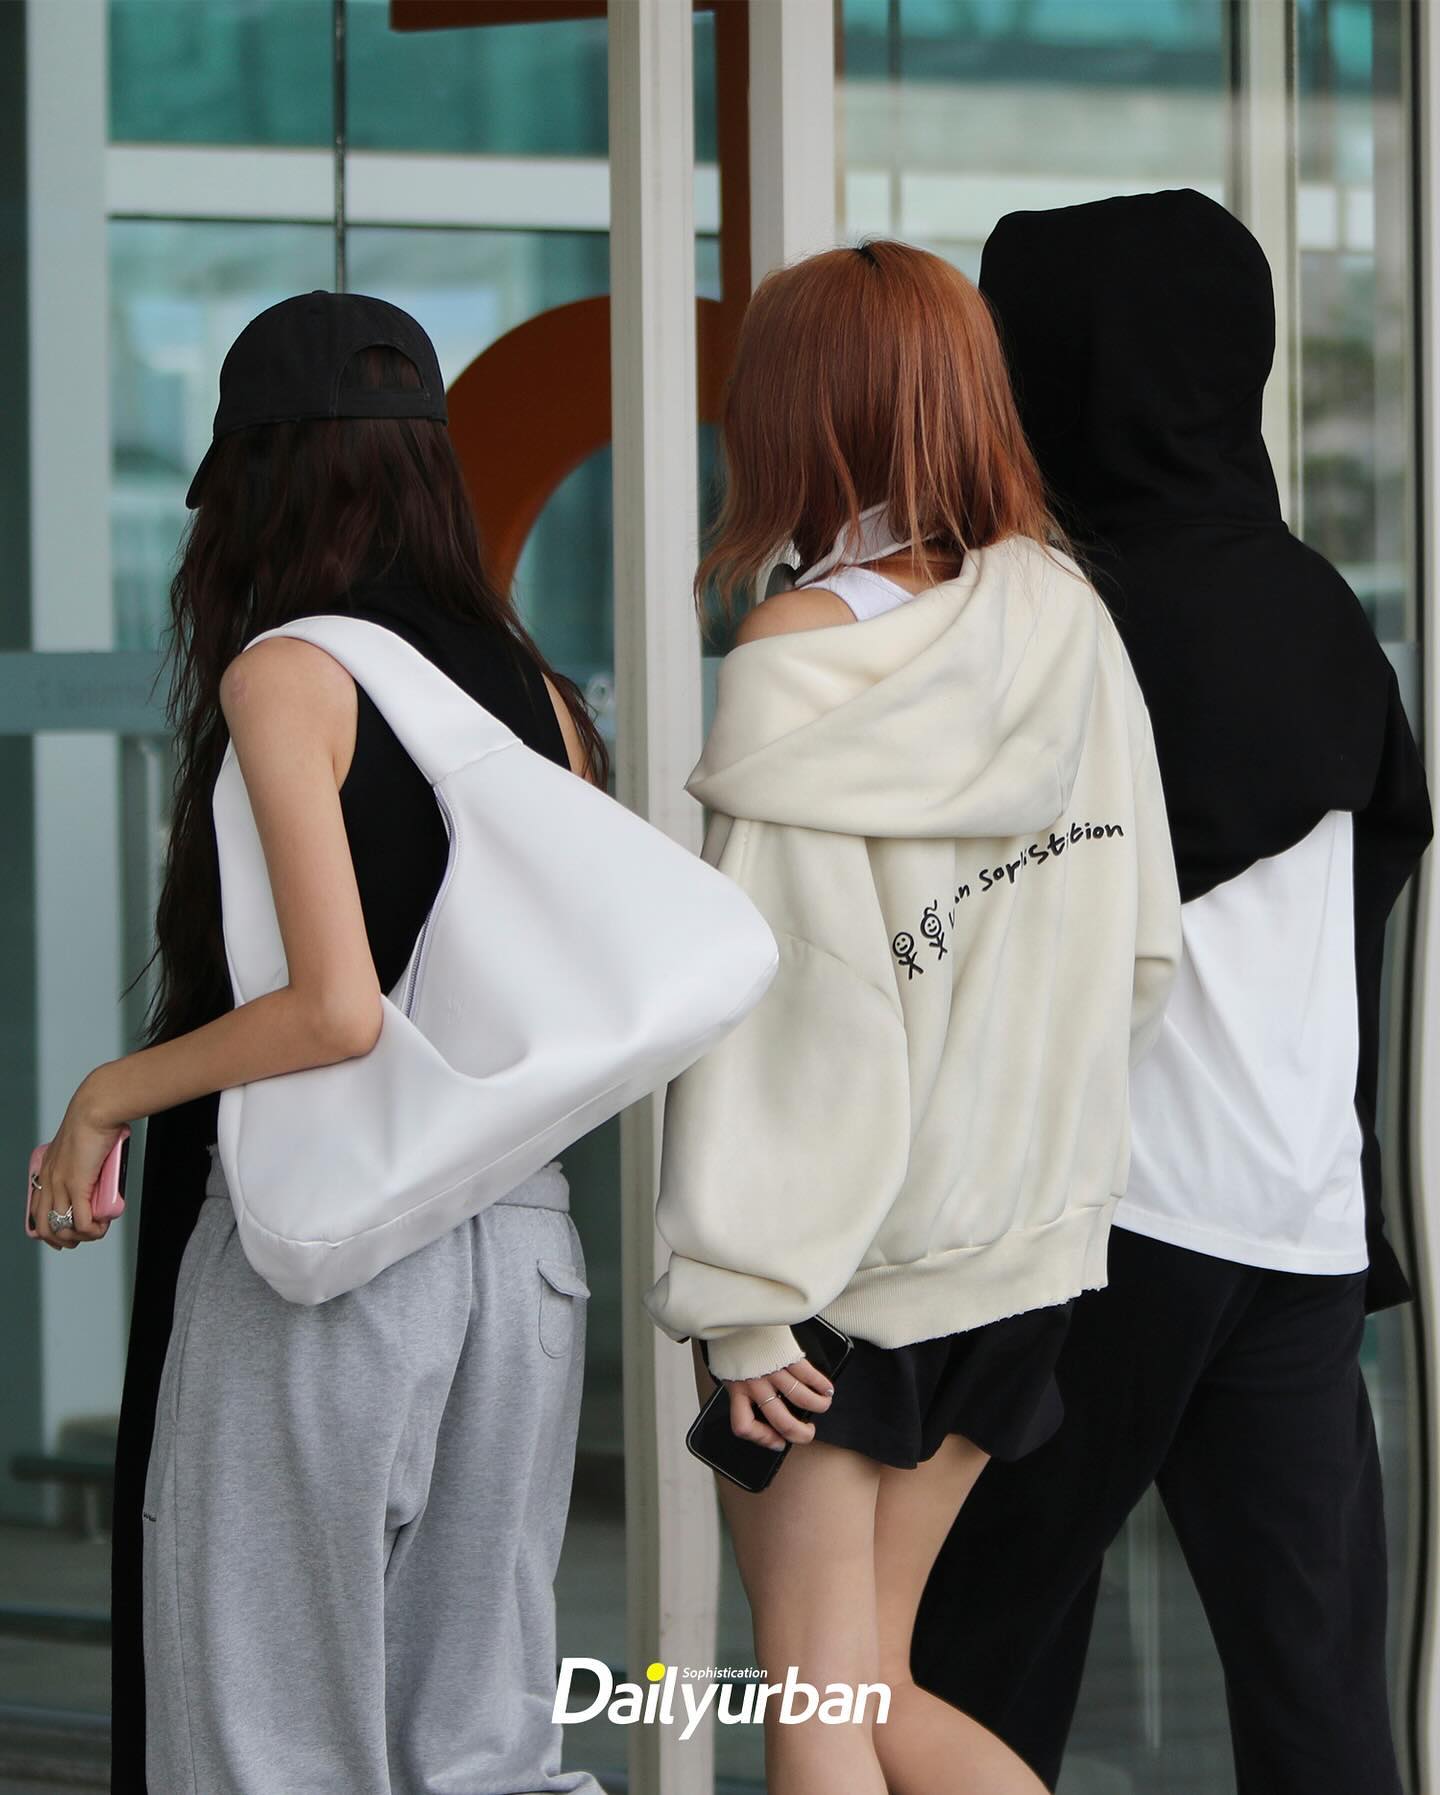 to-by-urban-sophistication-on-july-17-2024-may-be-an-image-of-3-people-top-sweatpants-sweatshirt-and-text-17212978965791809223852-1721359211016-1721359211192653696102.jpg